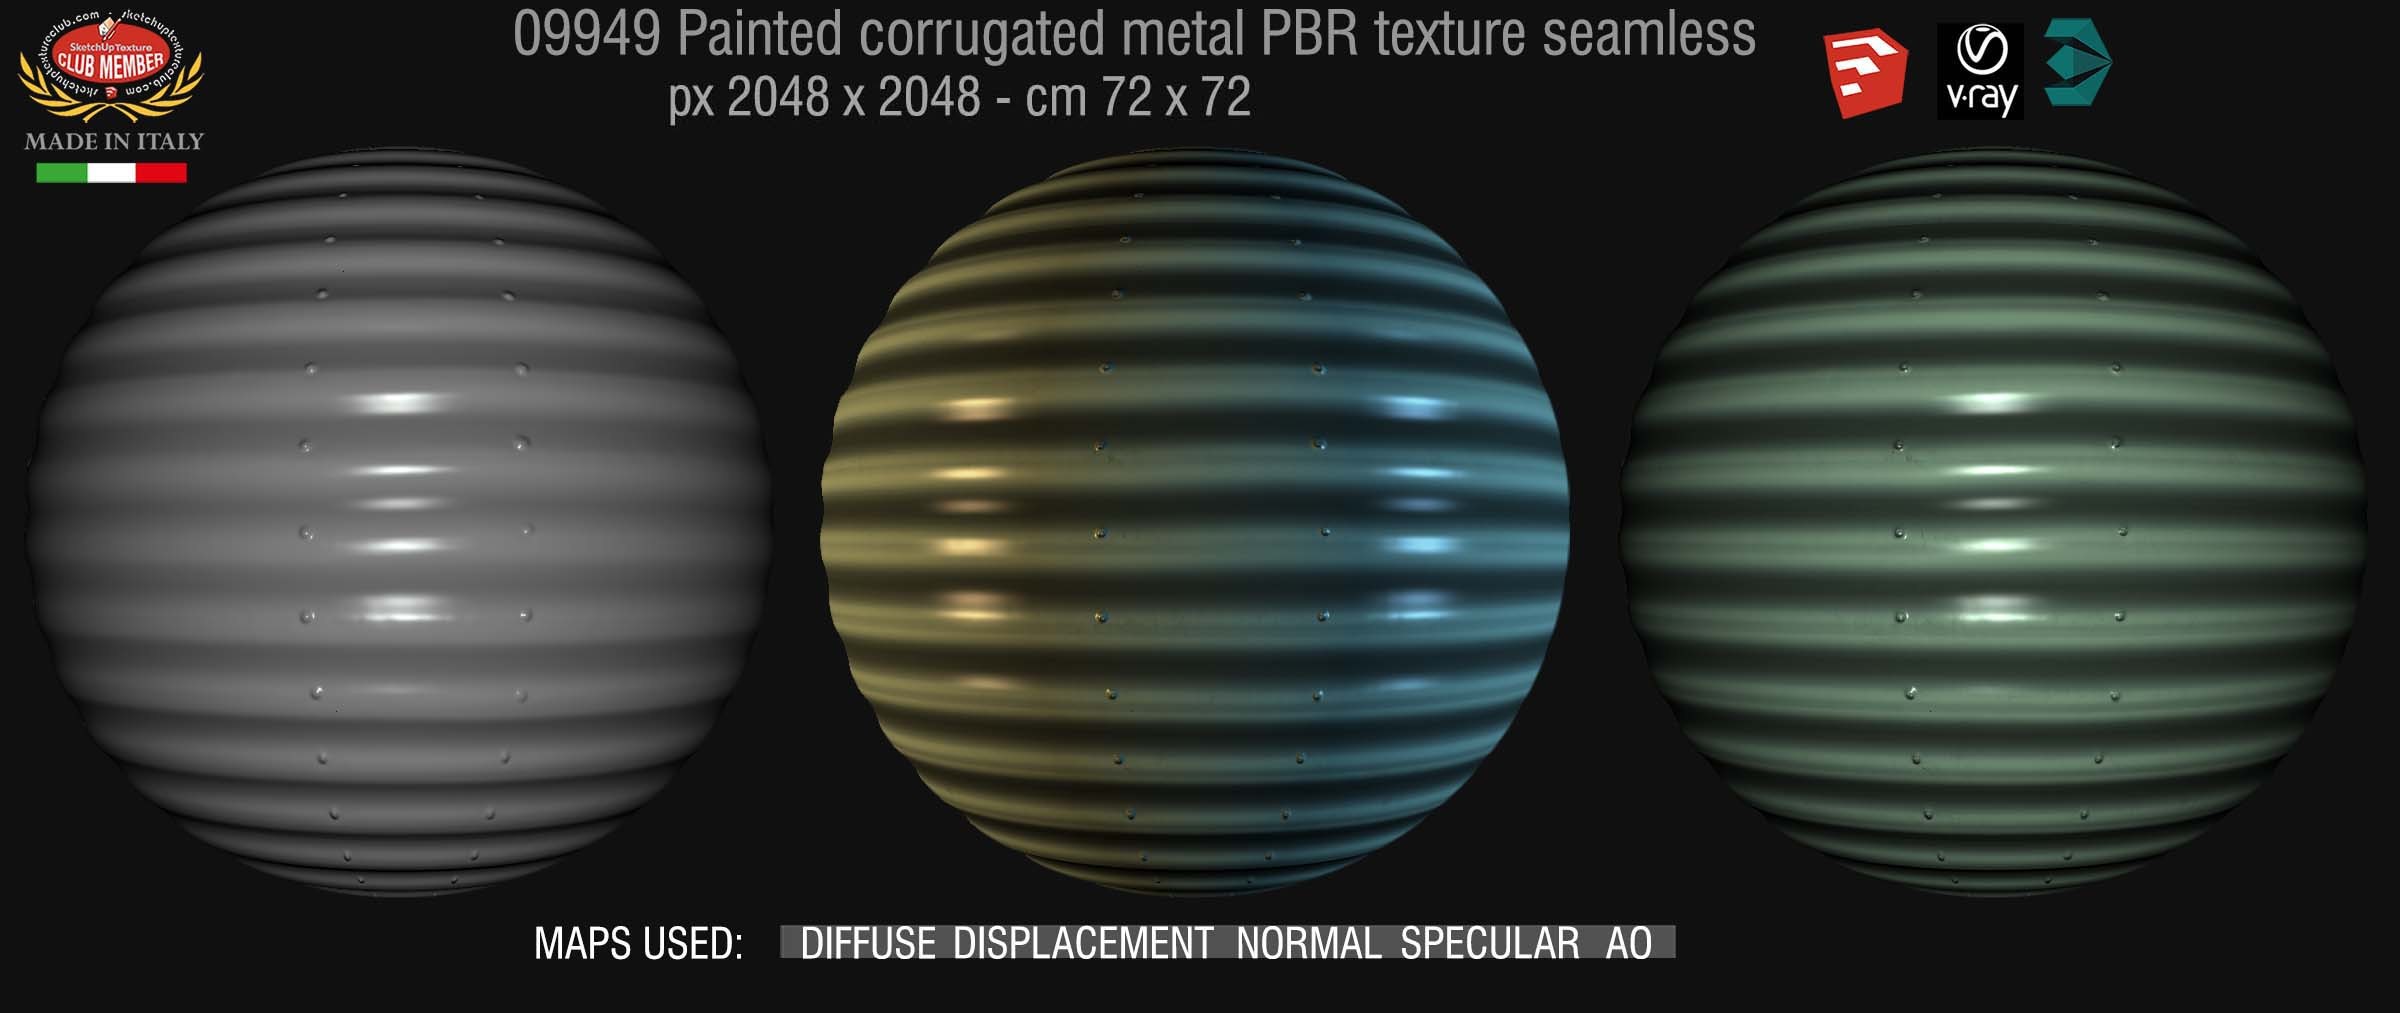 09949 Painted corrugated steel PBR texture seamless DEMO